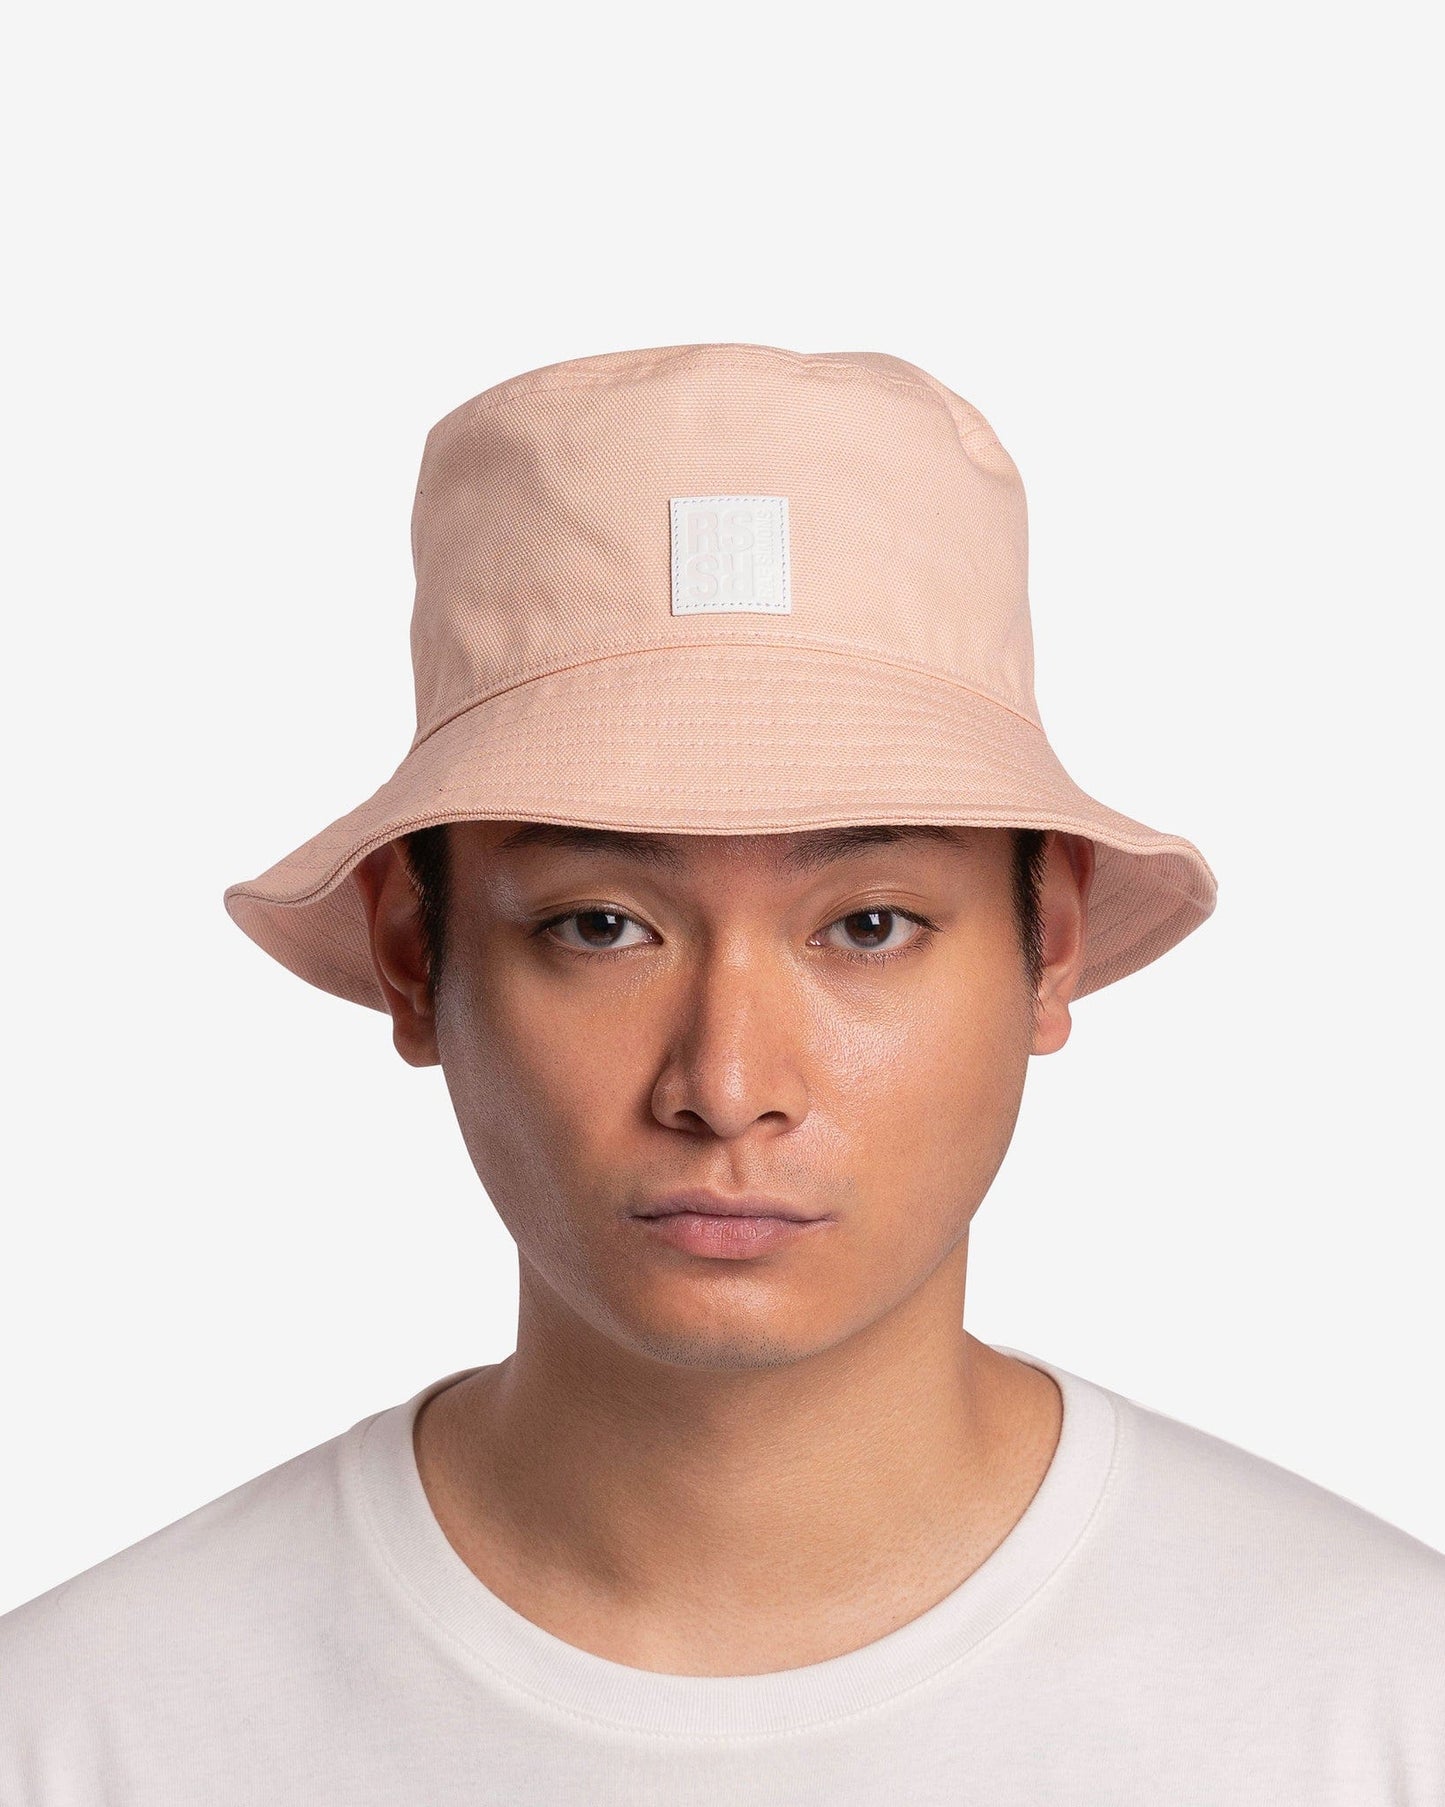 Raf Simons Men's Hats Small Leather Patch Bucket Hat in Salmon